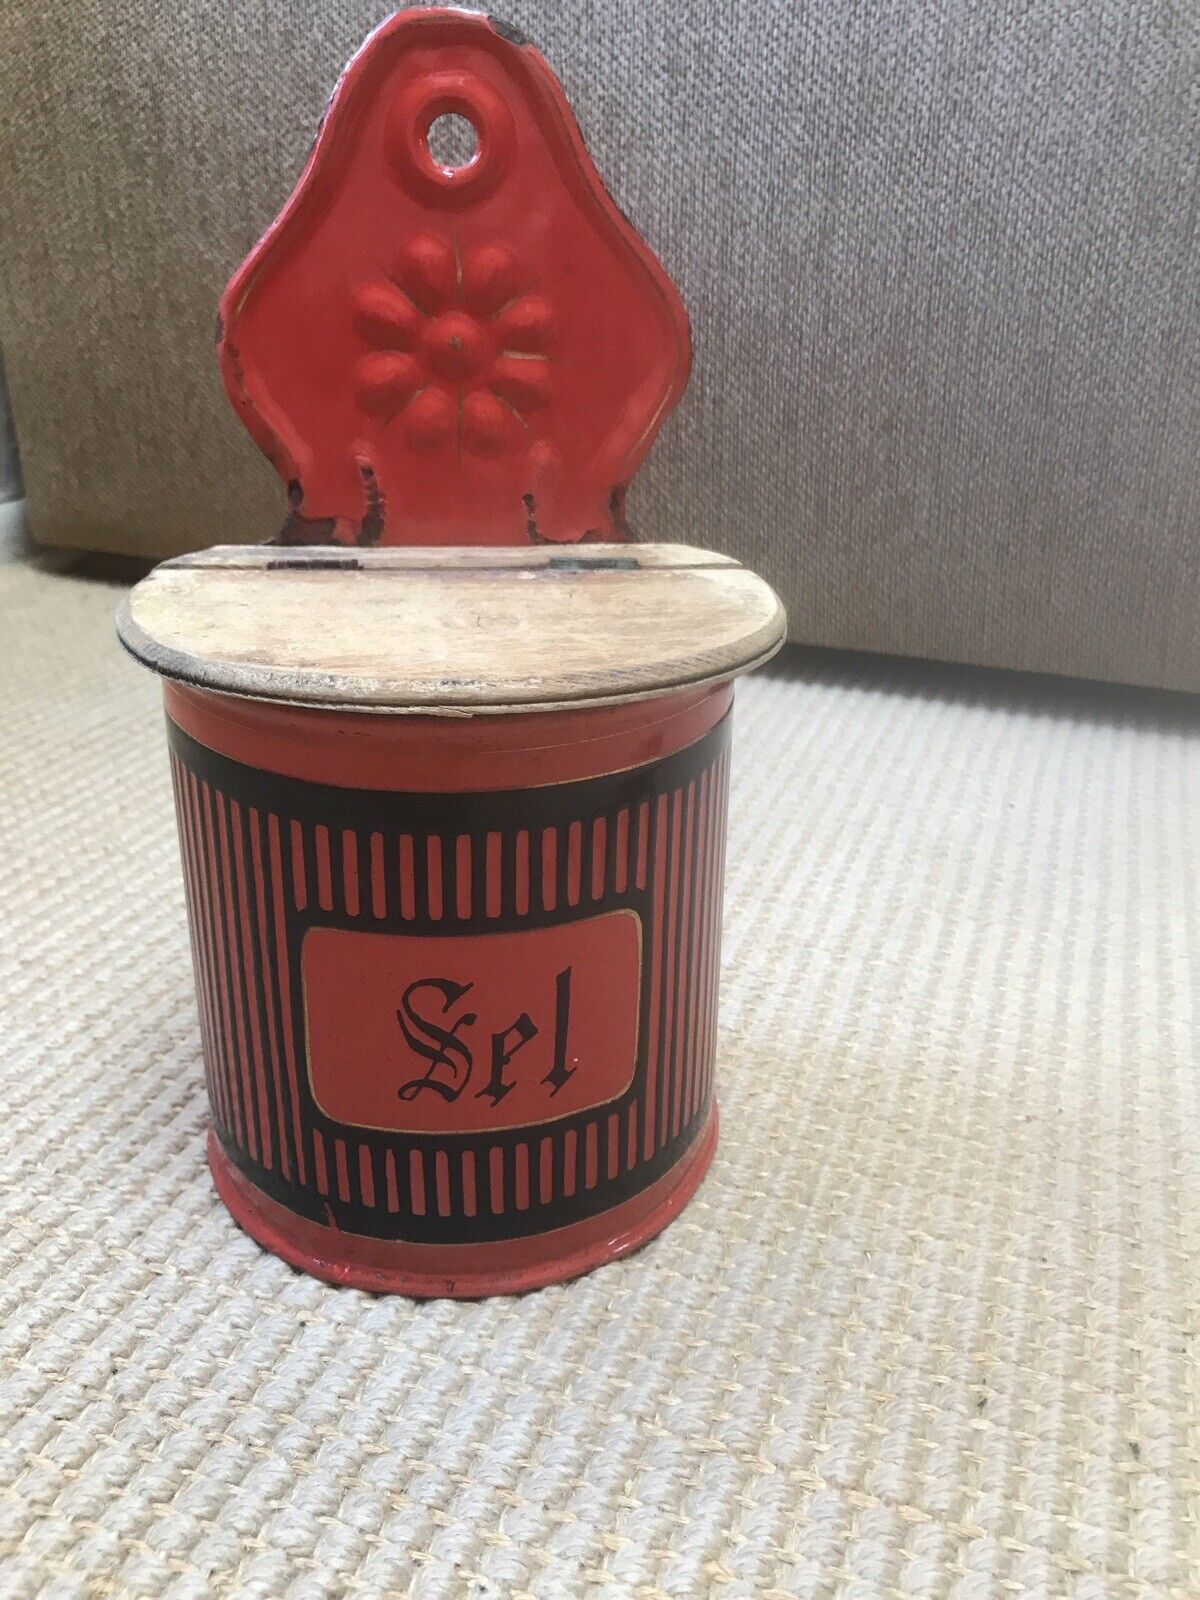 CLEARANCE ITEM READ = french SEL Box.  ENAMELWARE red with black raised stripes